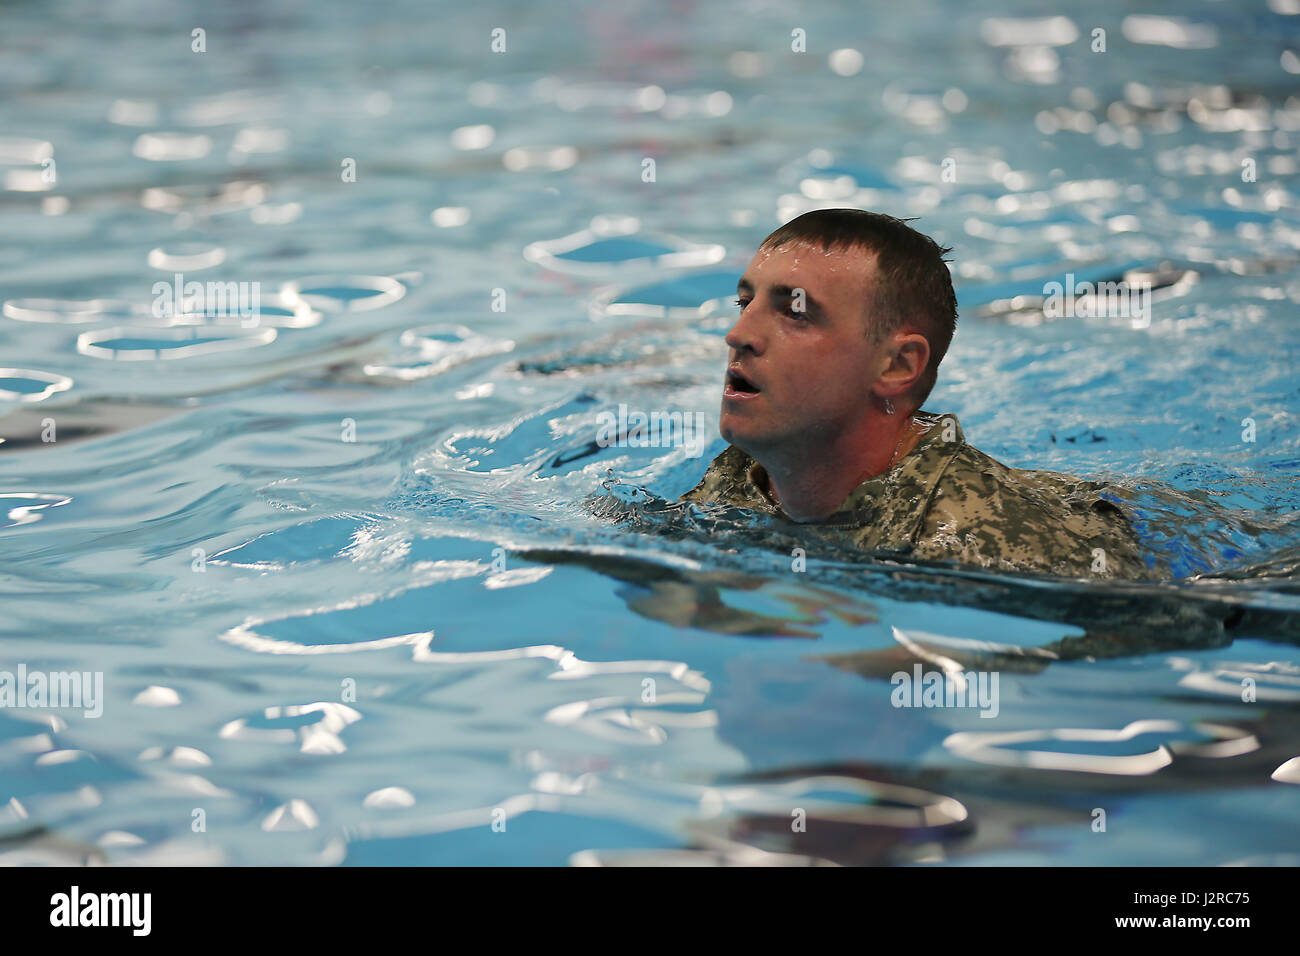 U.S. Army Sgt. Anthony Barba, 184th Headquarters and Headquarters Detachment (EOD), 184th Ordnance Disposal Battalion (EOD), 52nd Ordnance Group (EOD), stops to catch his breath during the 100 meter swim portion of the German Armed Forces Proficiency Badge (GAFPB) at Central Washington University, Ellensburg, Wash., April 23, 2017. The GAFPB swim requires participants to swim in uniform, without boots, for 100 meters in under four minutes, then remove the uniform in the deep end without holding the edges of the pool. (U.S. Army photo by Sgt. Kalie Jones) Stock Photo